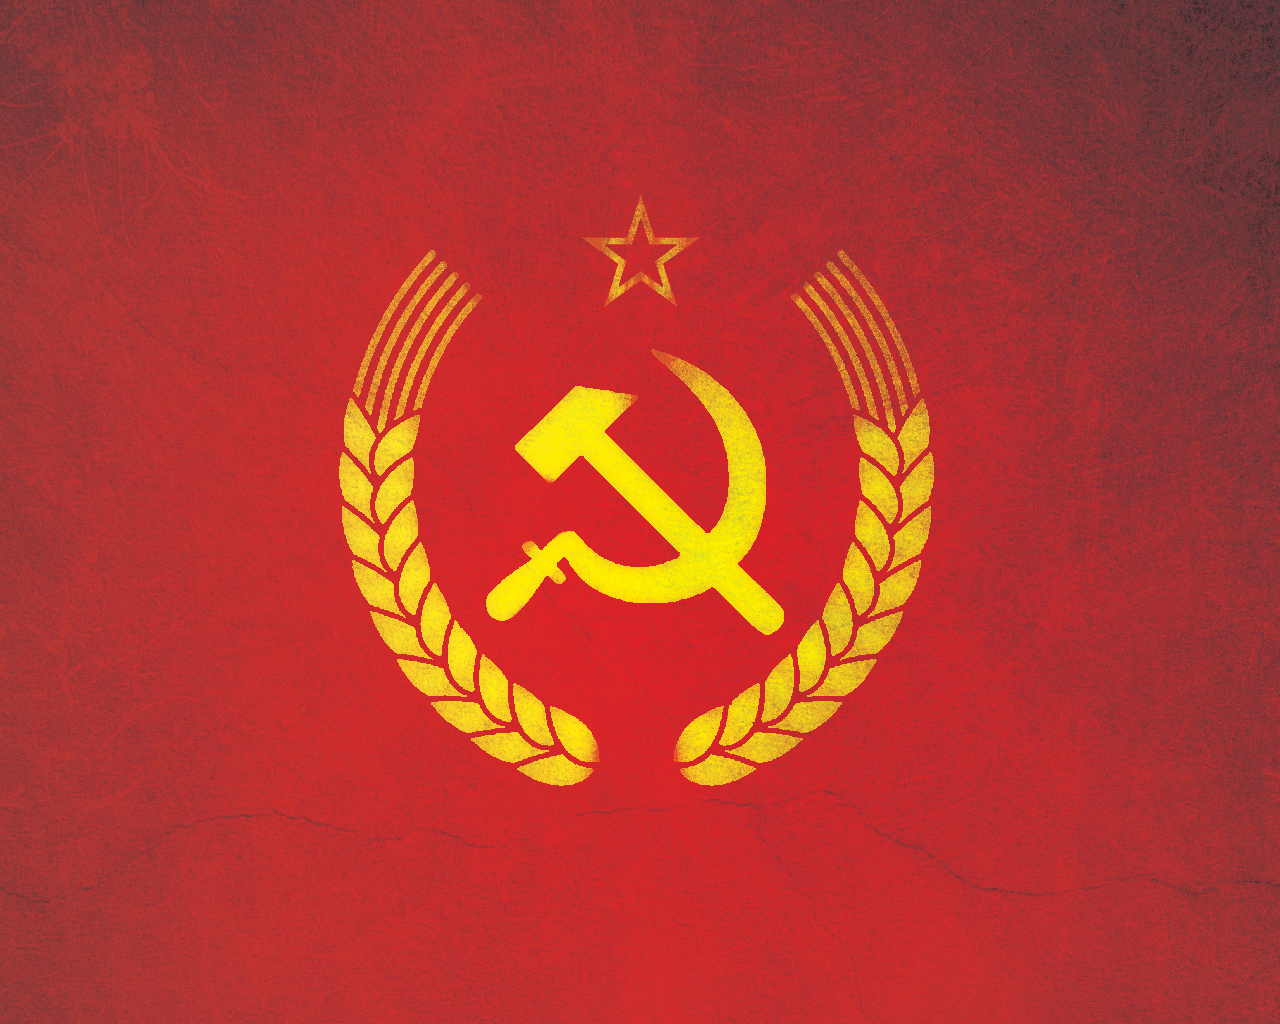 HD wallpaper: USSR flag, red, symbol, the hammer and sickle, star Shape,  backgrounds | Wallpaper Flare